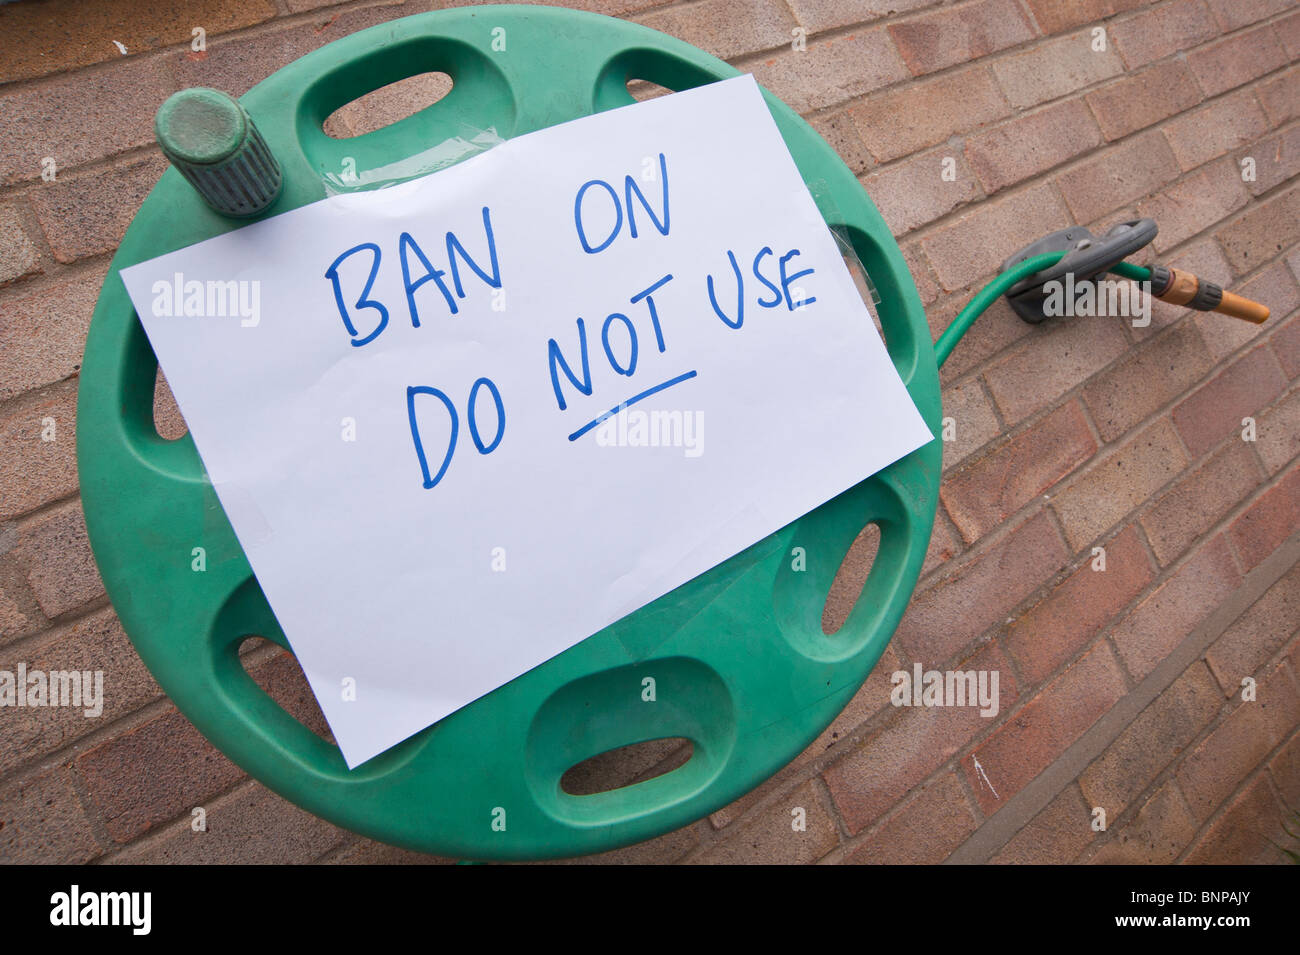 A hose pipe with a sign on it stopping use due to a hose pipe ban in the Uk Stock Photo